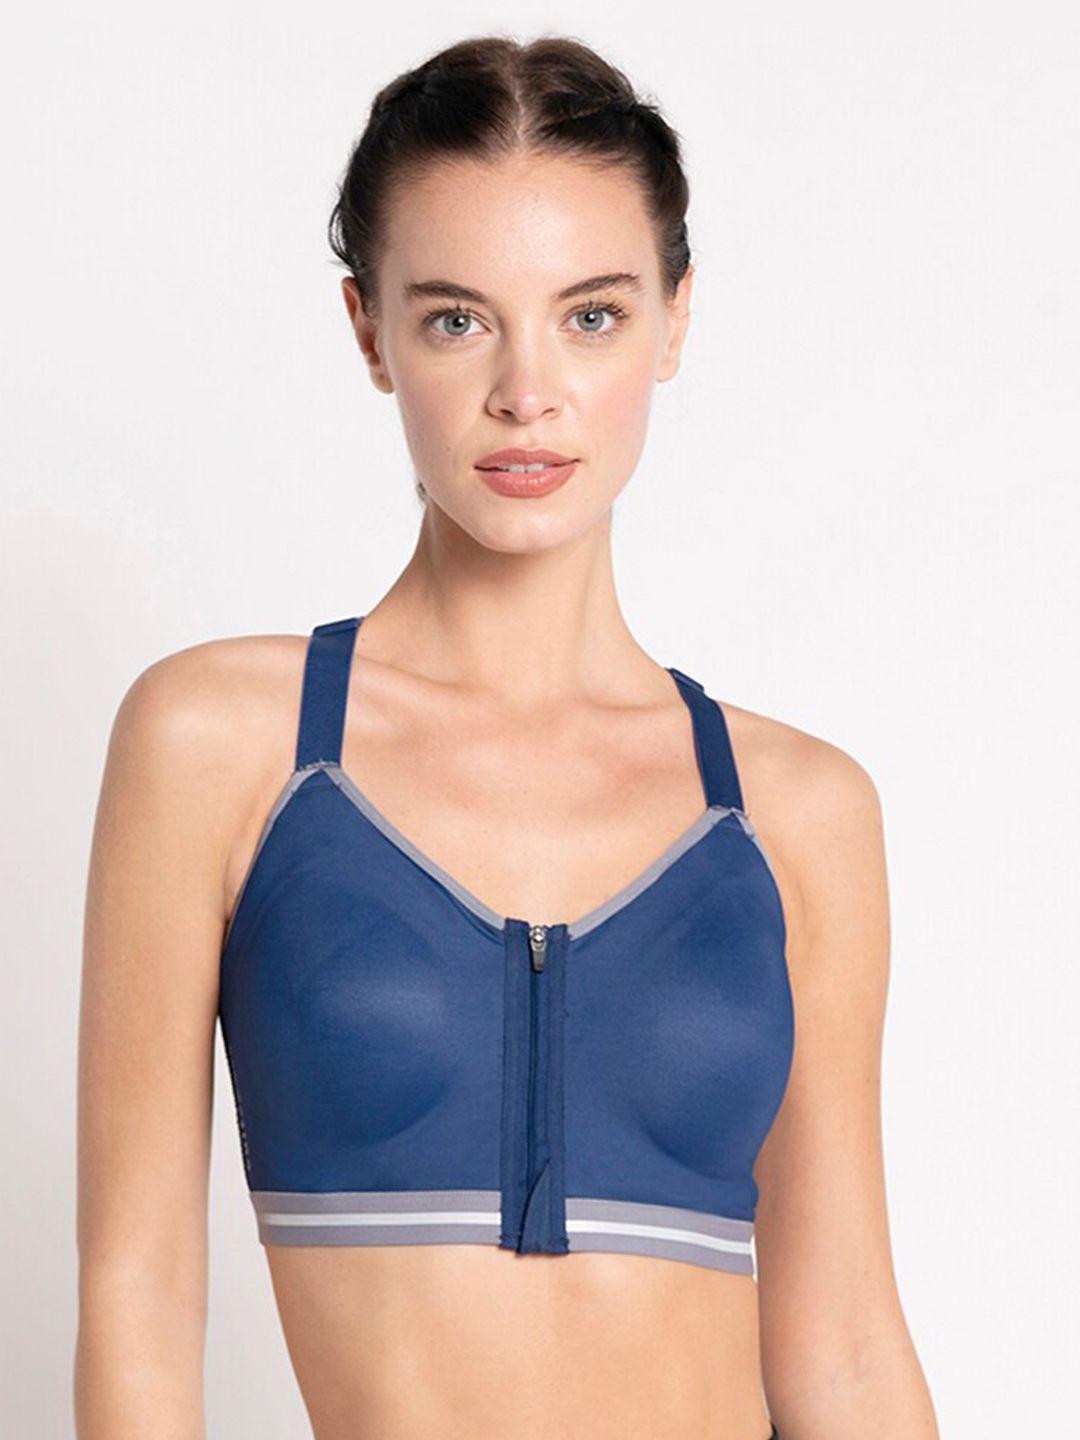 cultsport navy blue solid non-wired lightly padded sports bra aw19ws1235b